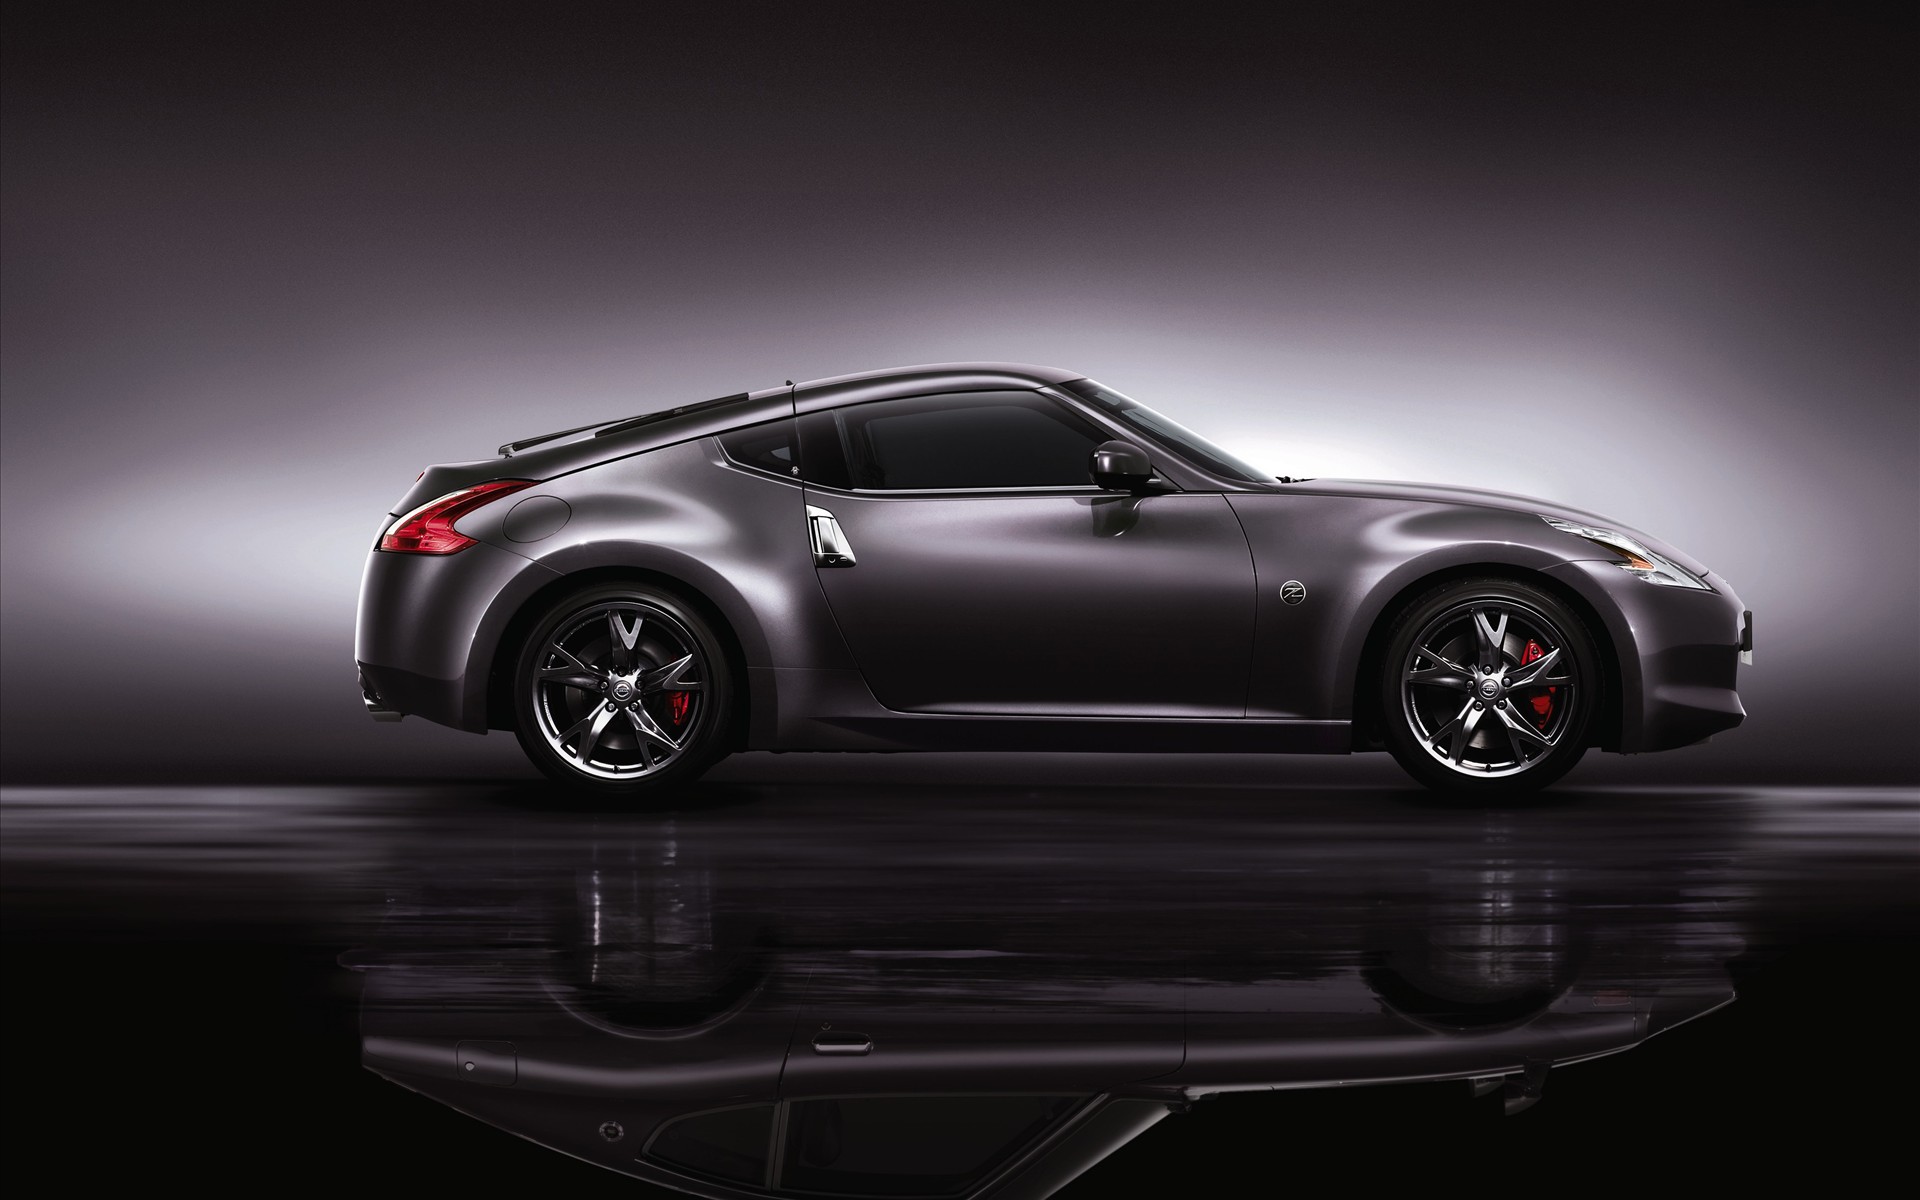 Nissan New Limited Edition 370z 40th Anniversary Model Wallpaper